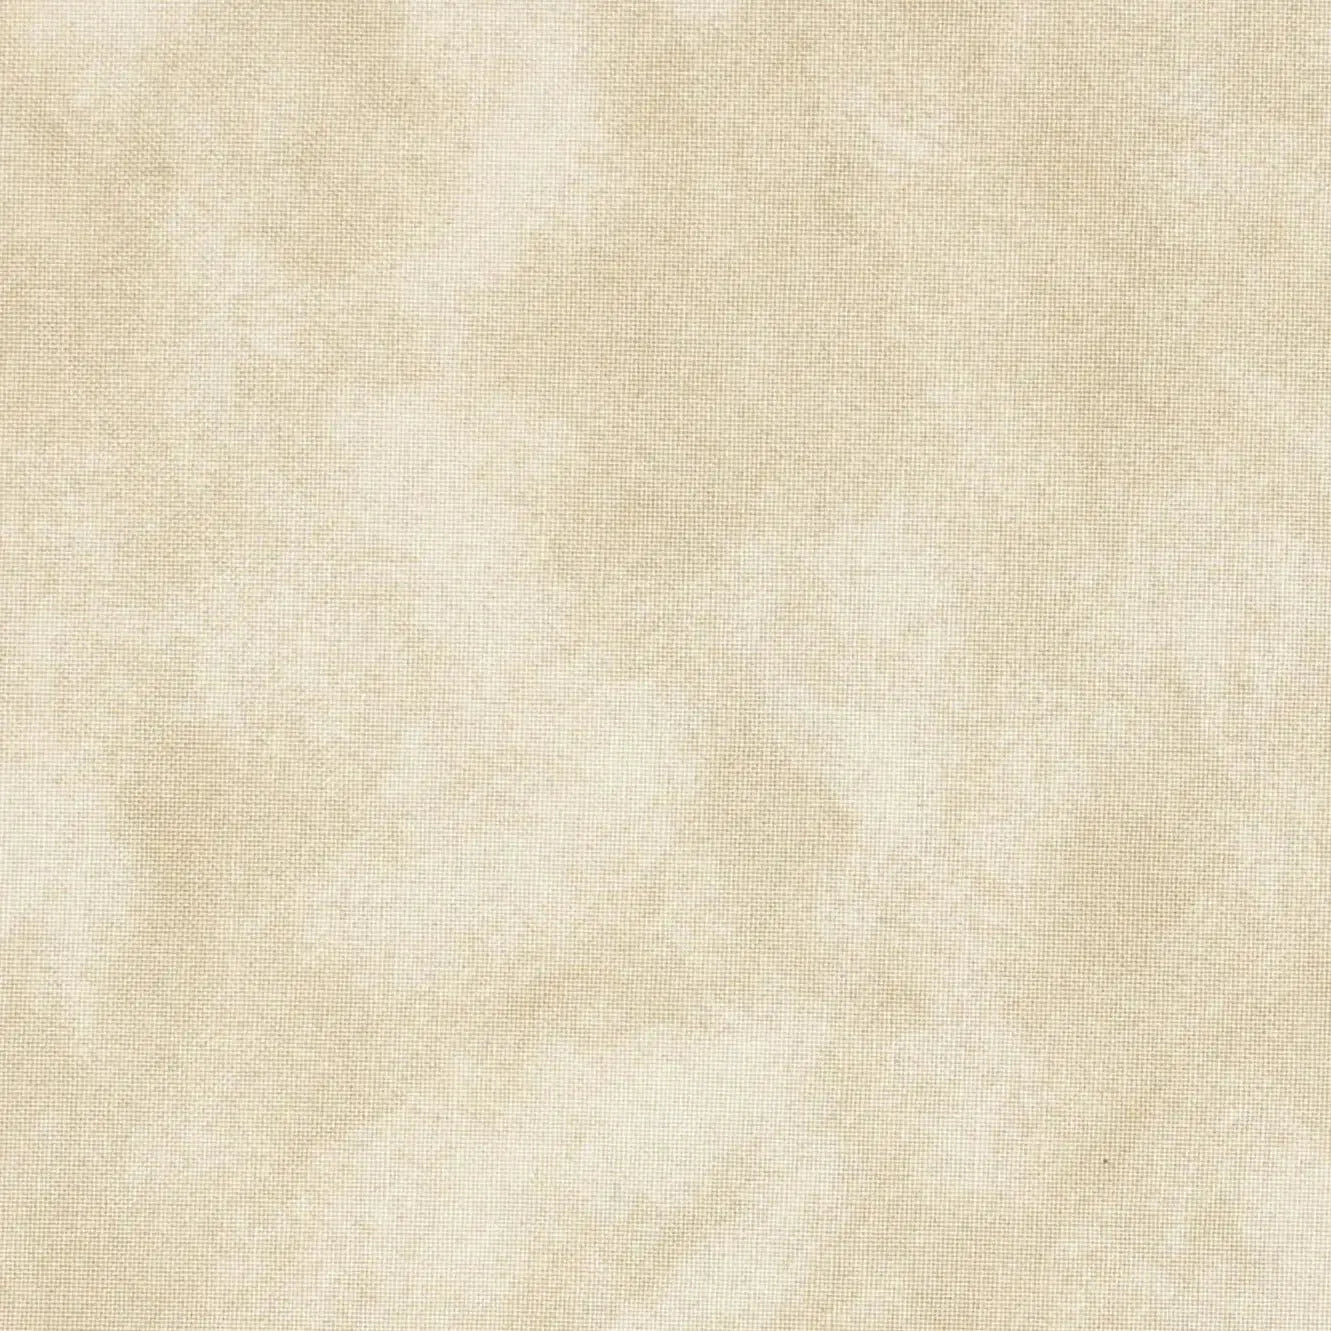 Natural Cream Color Waves Cotton Wideback Fabric ( 1 7/8 Yard Pack ) - Linda's Electric Quilters